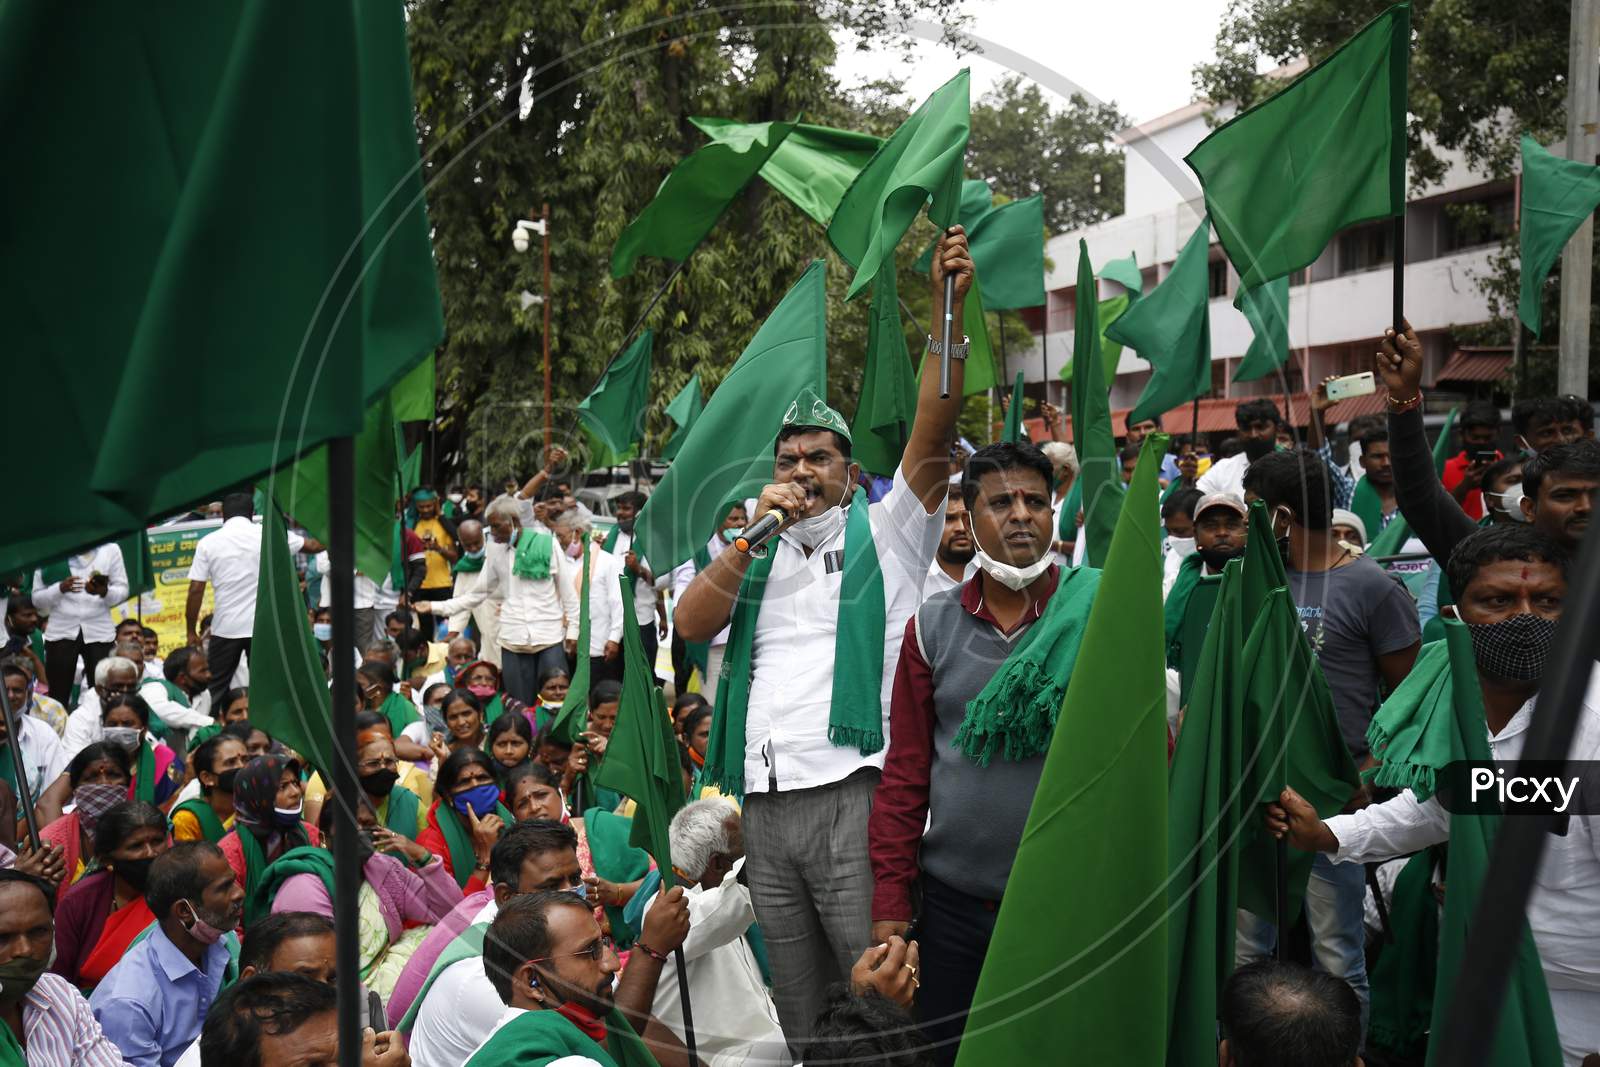 Farmers chant slogans against the government and wave flags during a protest against the passage of two controversial farm bills by the country’s parliament in Bangalore, India.